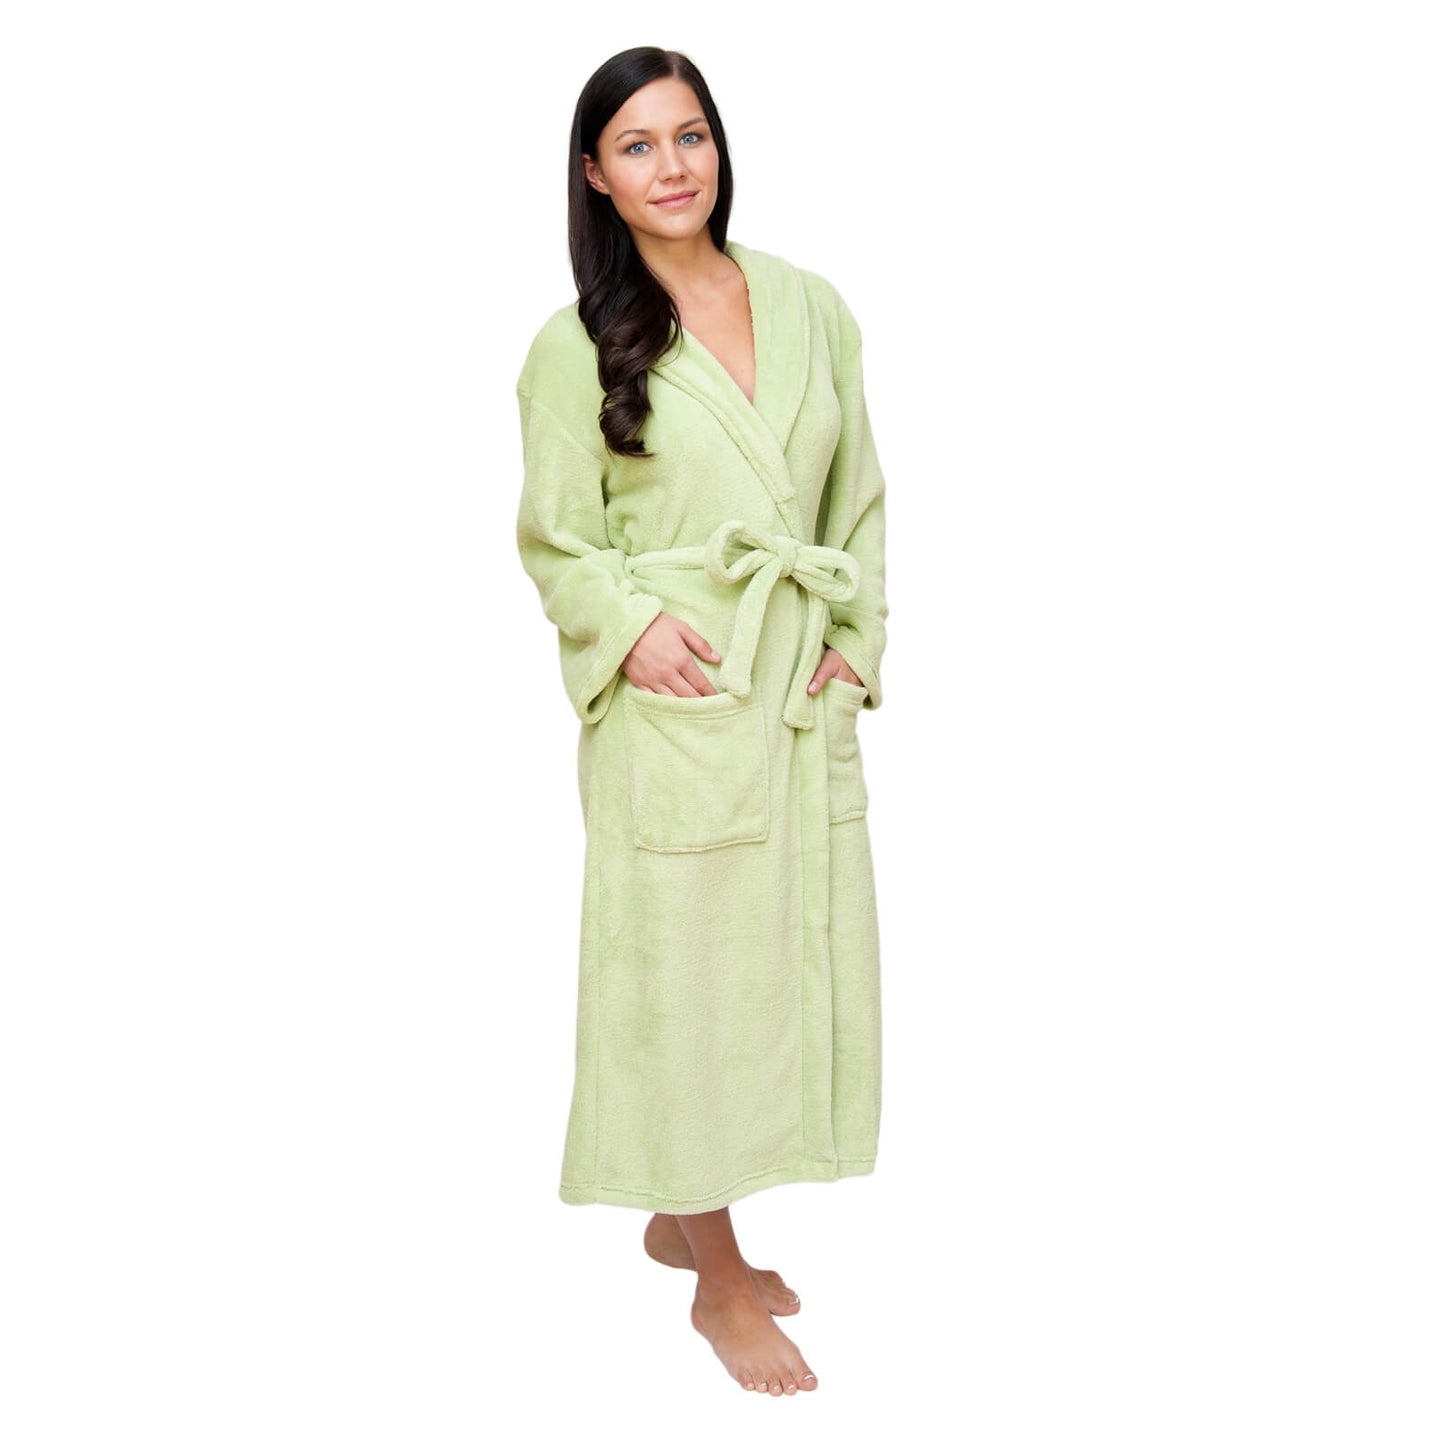 Robes for the Bride